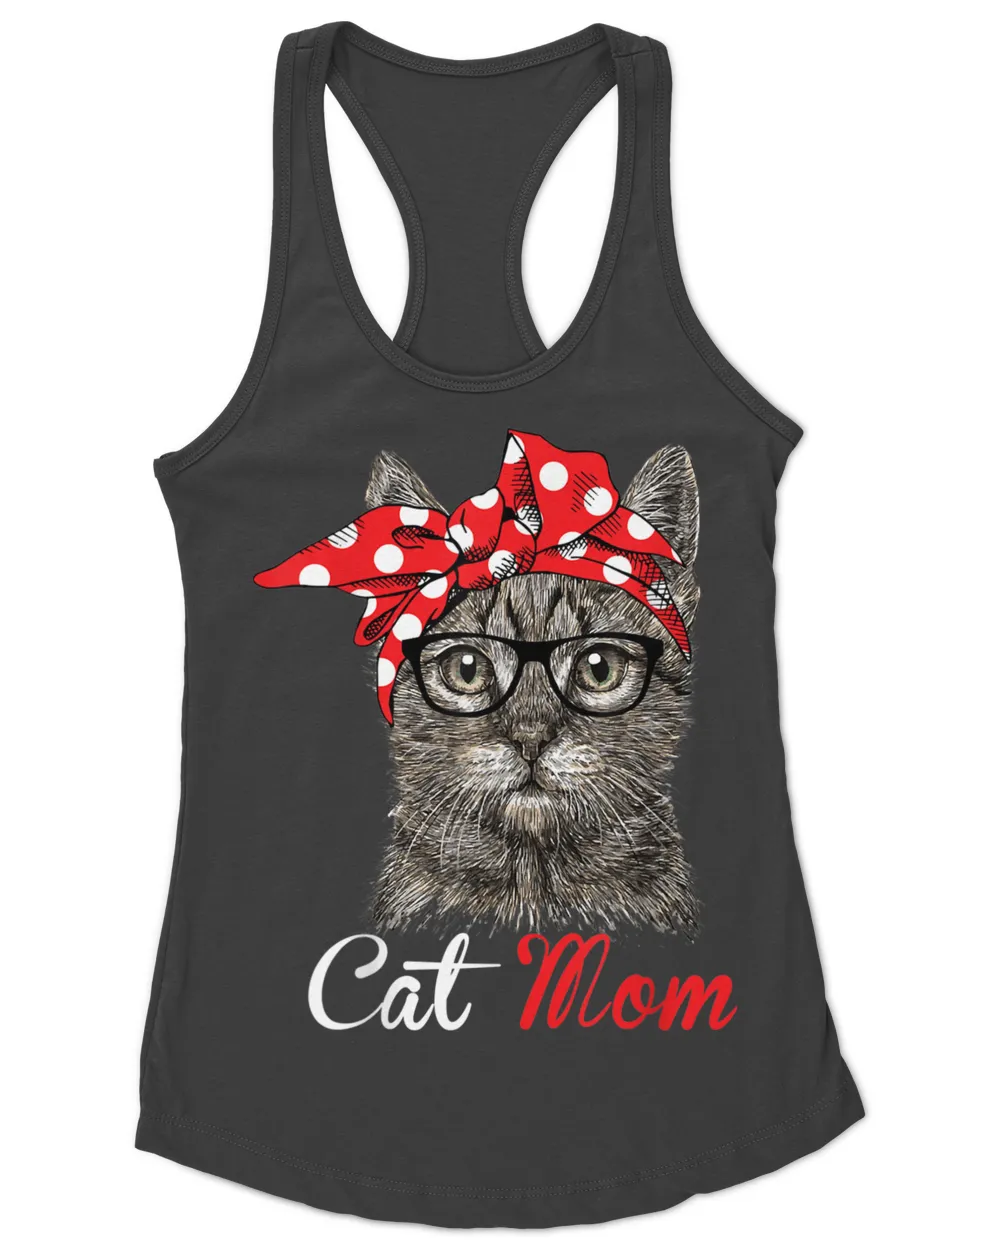 Funny Cat Mom Shirt for Cat Lovers-Mothers Day Gift QTCAT170123A11